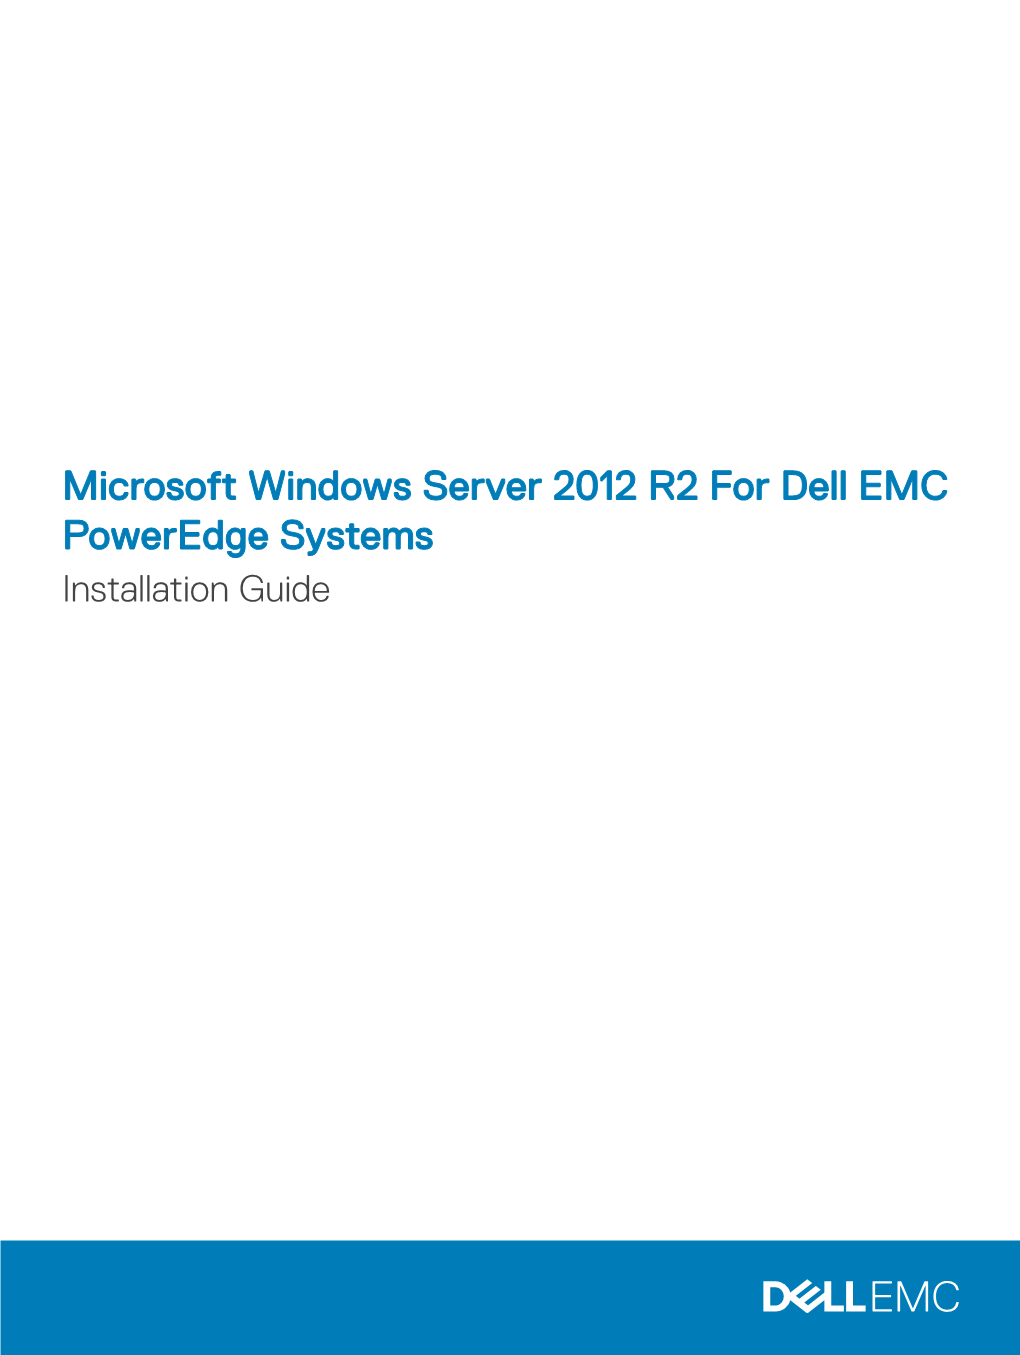 Microsoft Windows Server 2012 R2 for Dell EMC Poweredge Systems Installation Guide Notes, Cautions, and Warnings